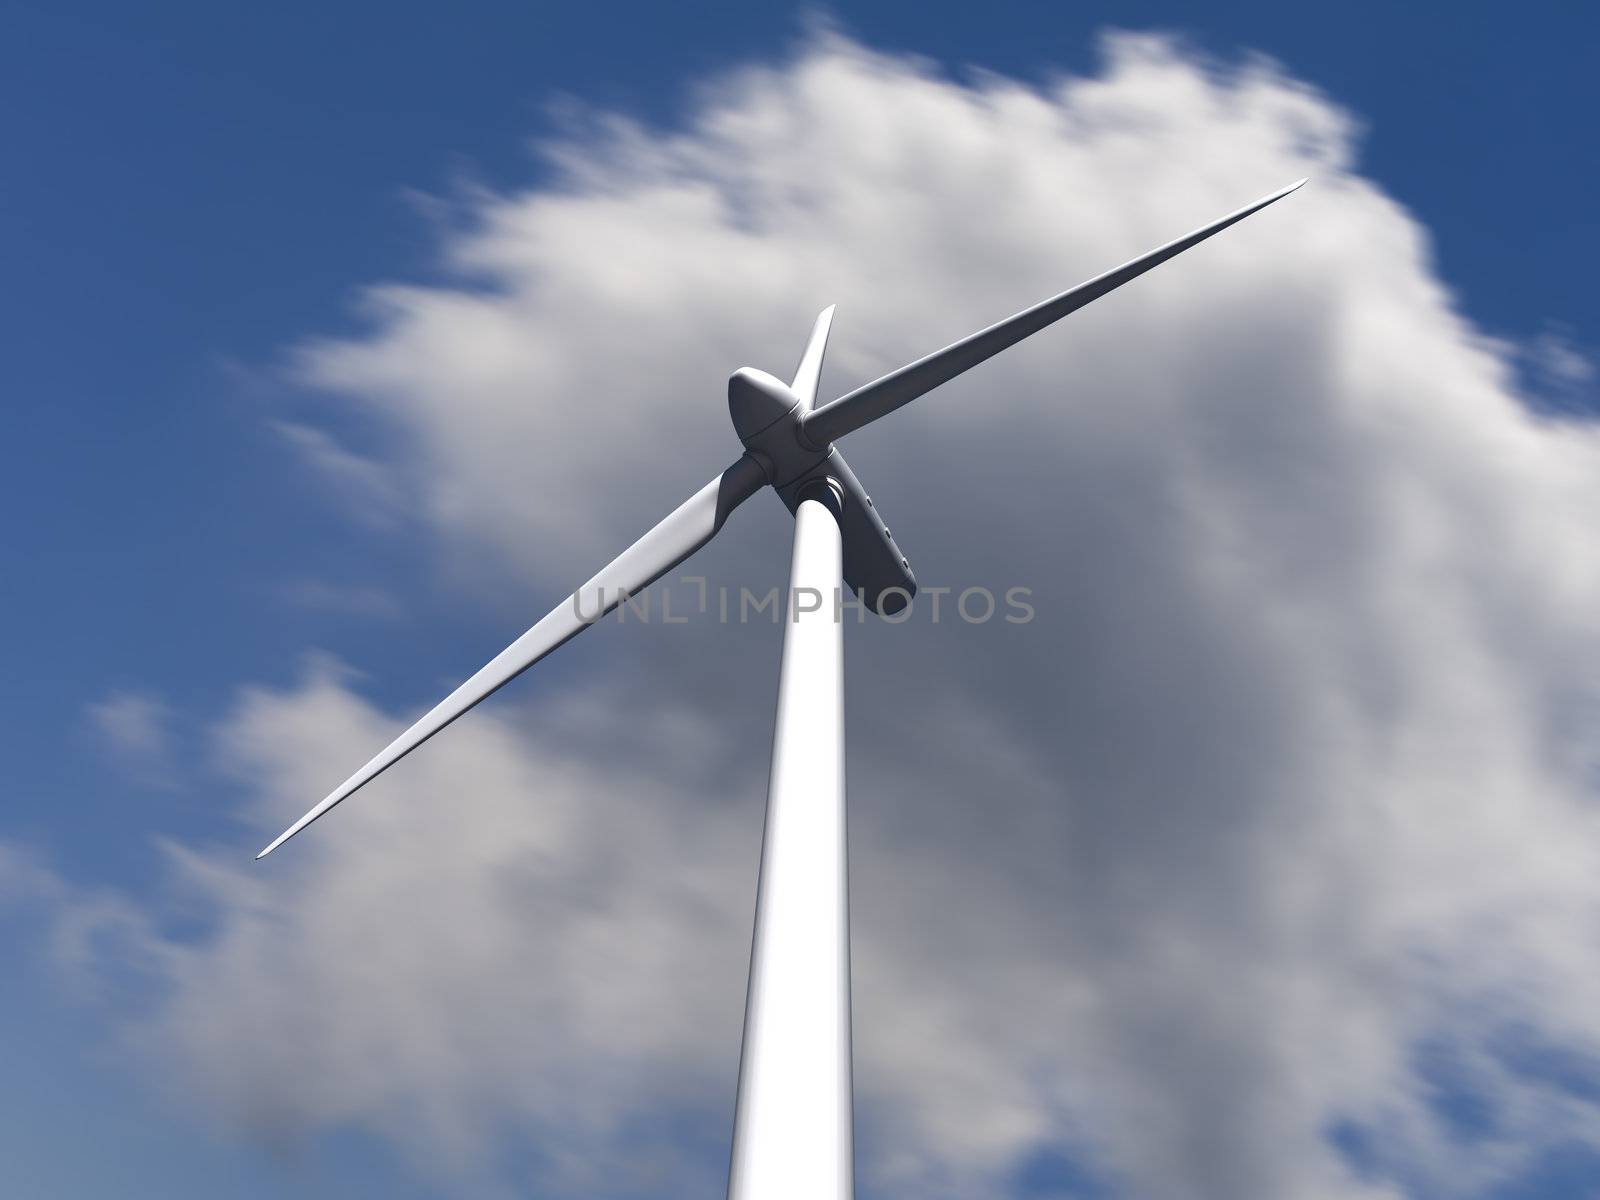 Wind turbines with sky and clouds on background by EnricoAgostoni